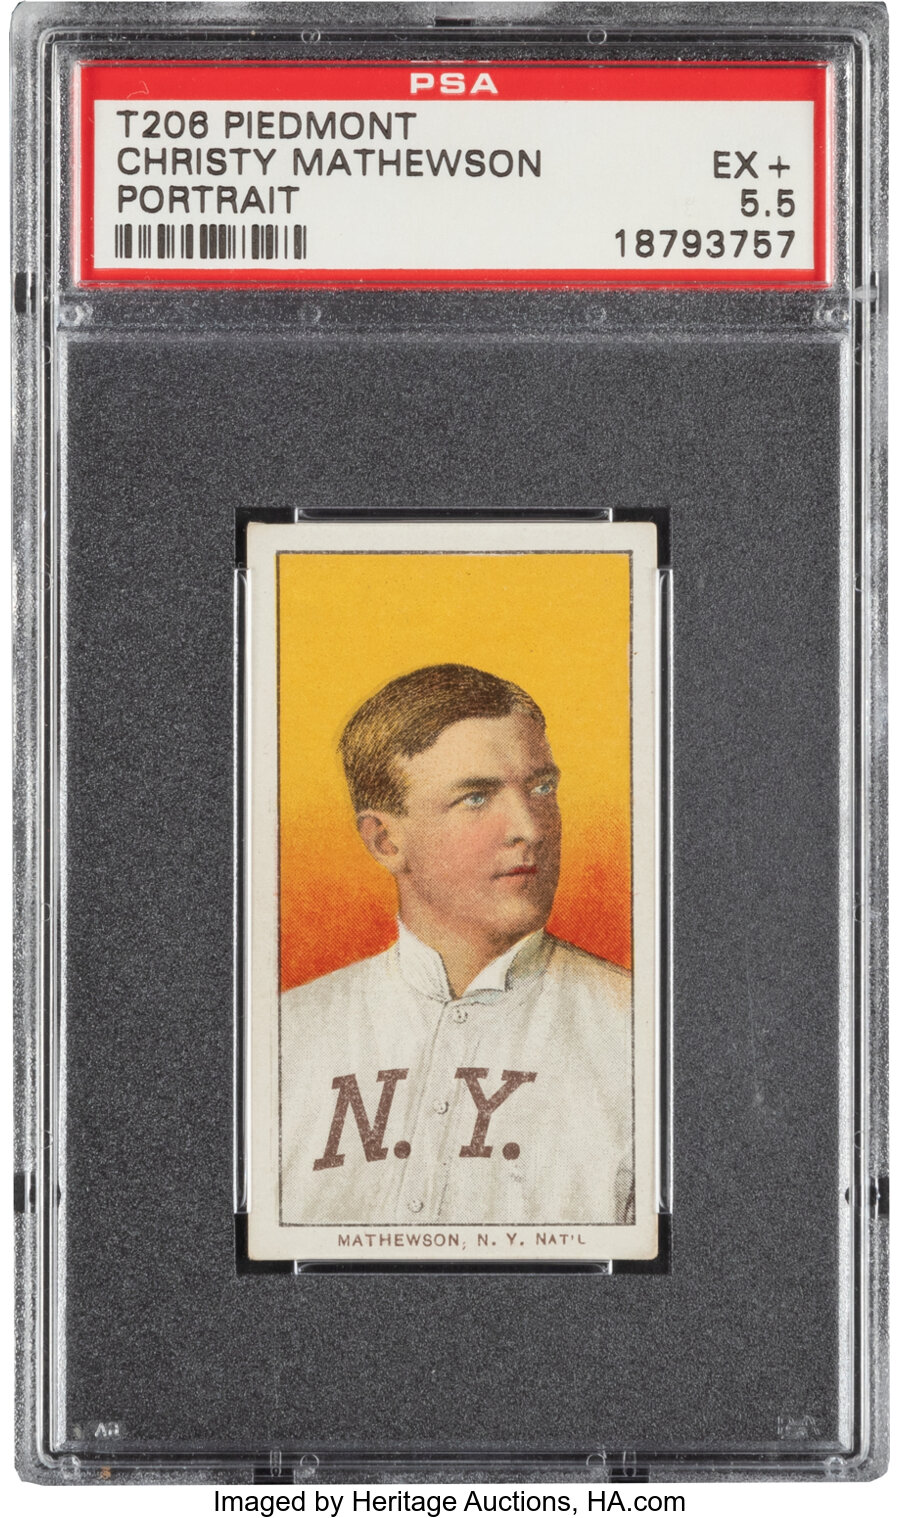 1909-11 T206 Piedmont 350 Christy Mathewson (Portrait) PSA EX+ 5.5 - Pop One, Only Two Higher for Brand/Series